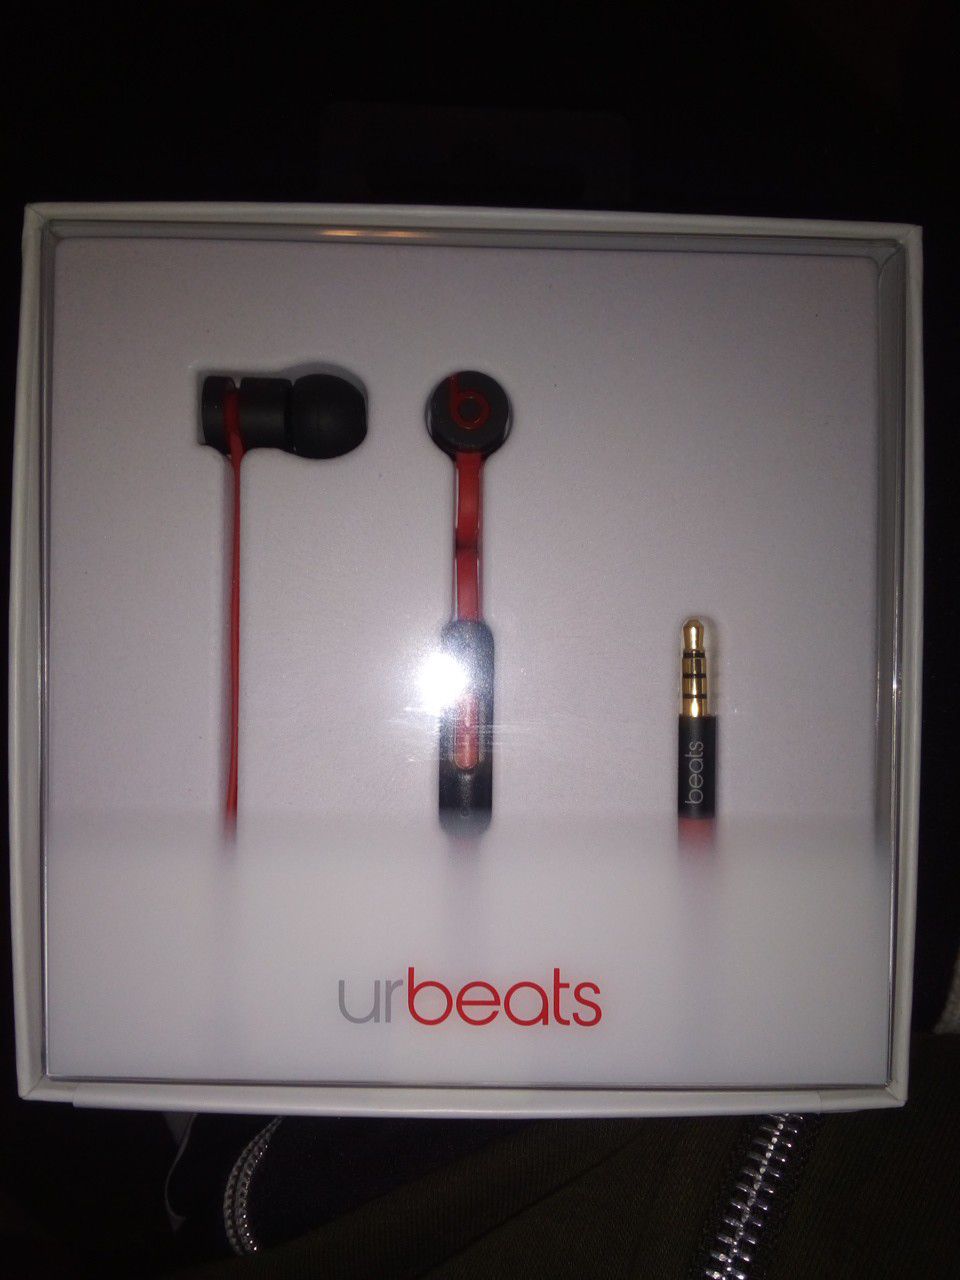 Beats By Dr. Dre - urbeats Brand New